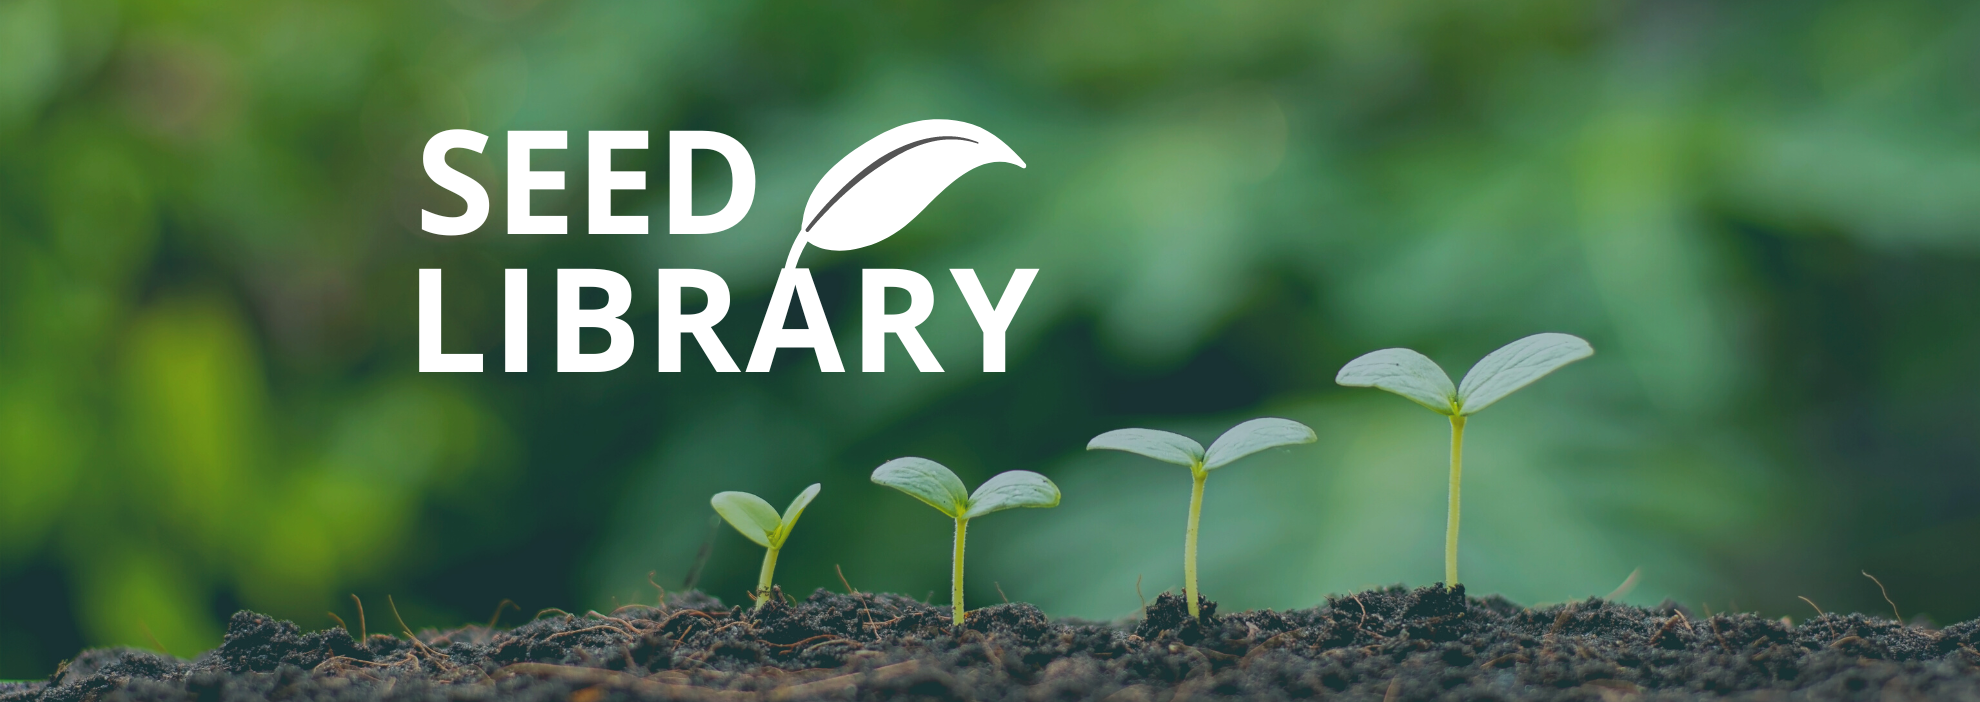 Seed library banner (1980 × 702px)